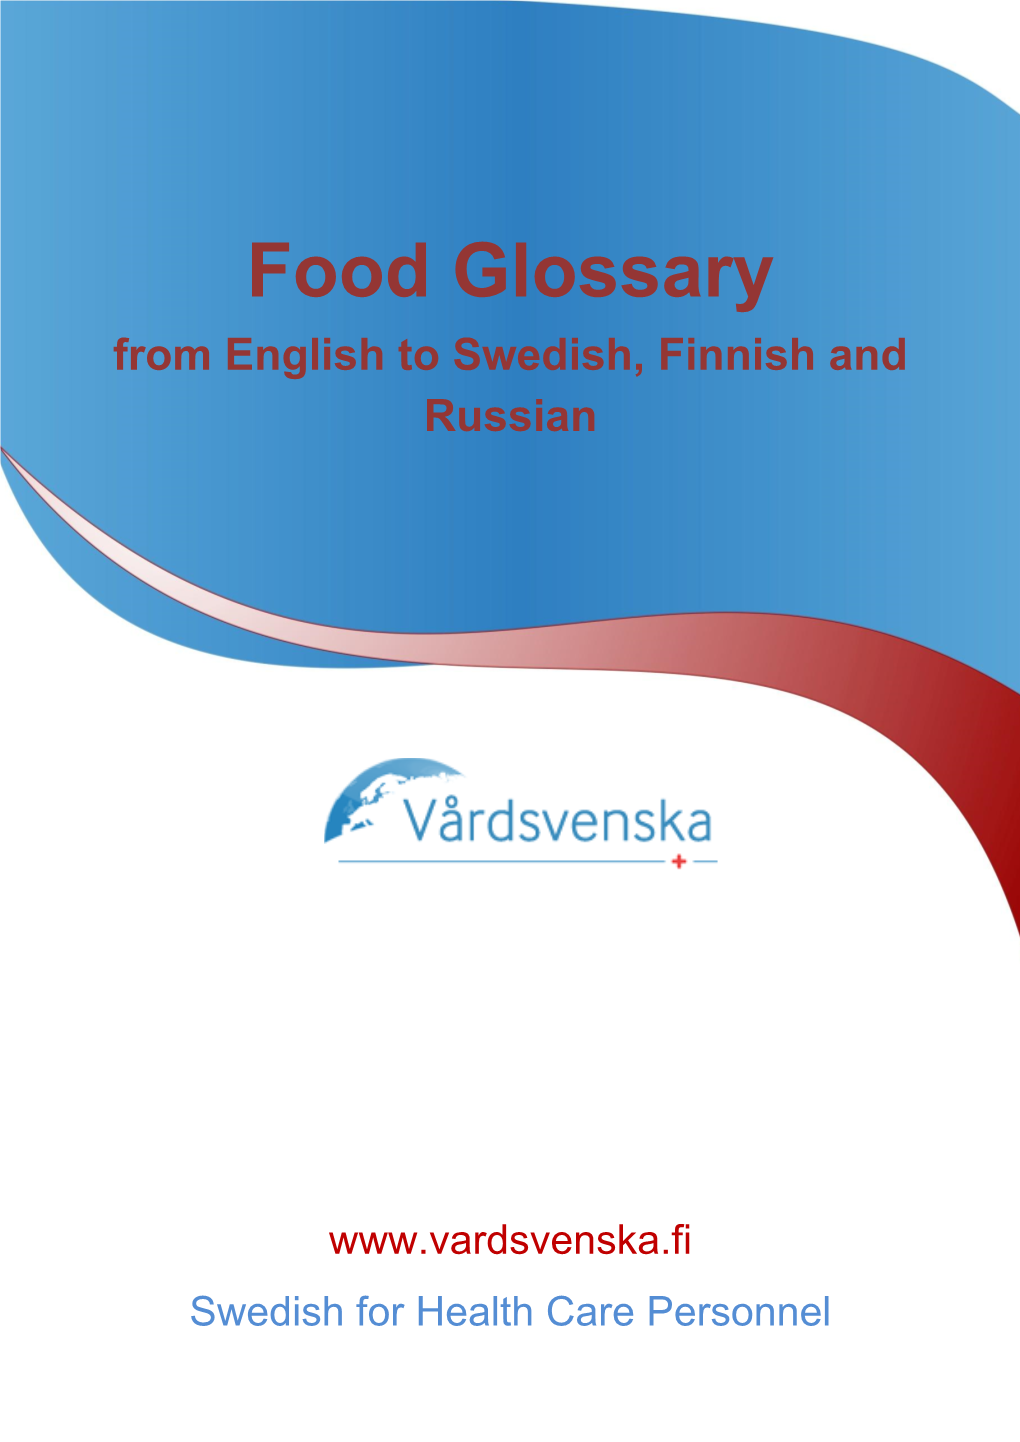 Food Glossary from English to Swedish, Finnish and Russian